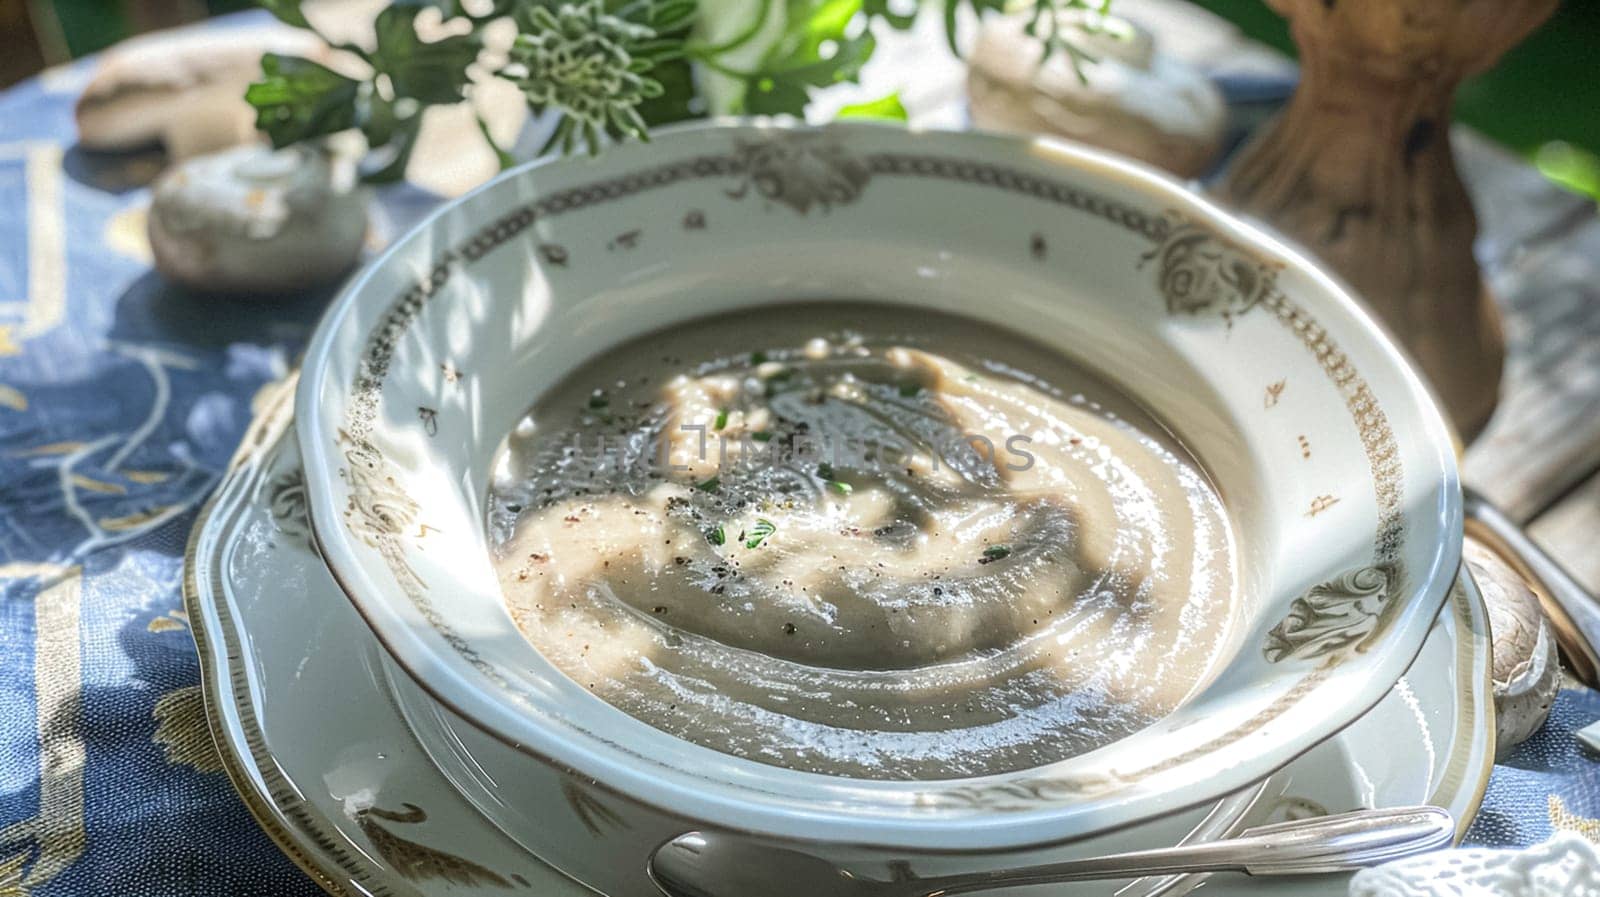 Mushroom cream soup served on a table in the garden by Anneleven